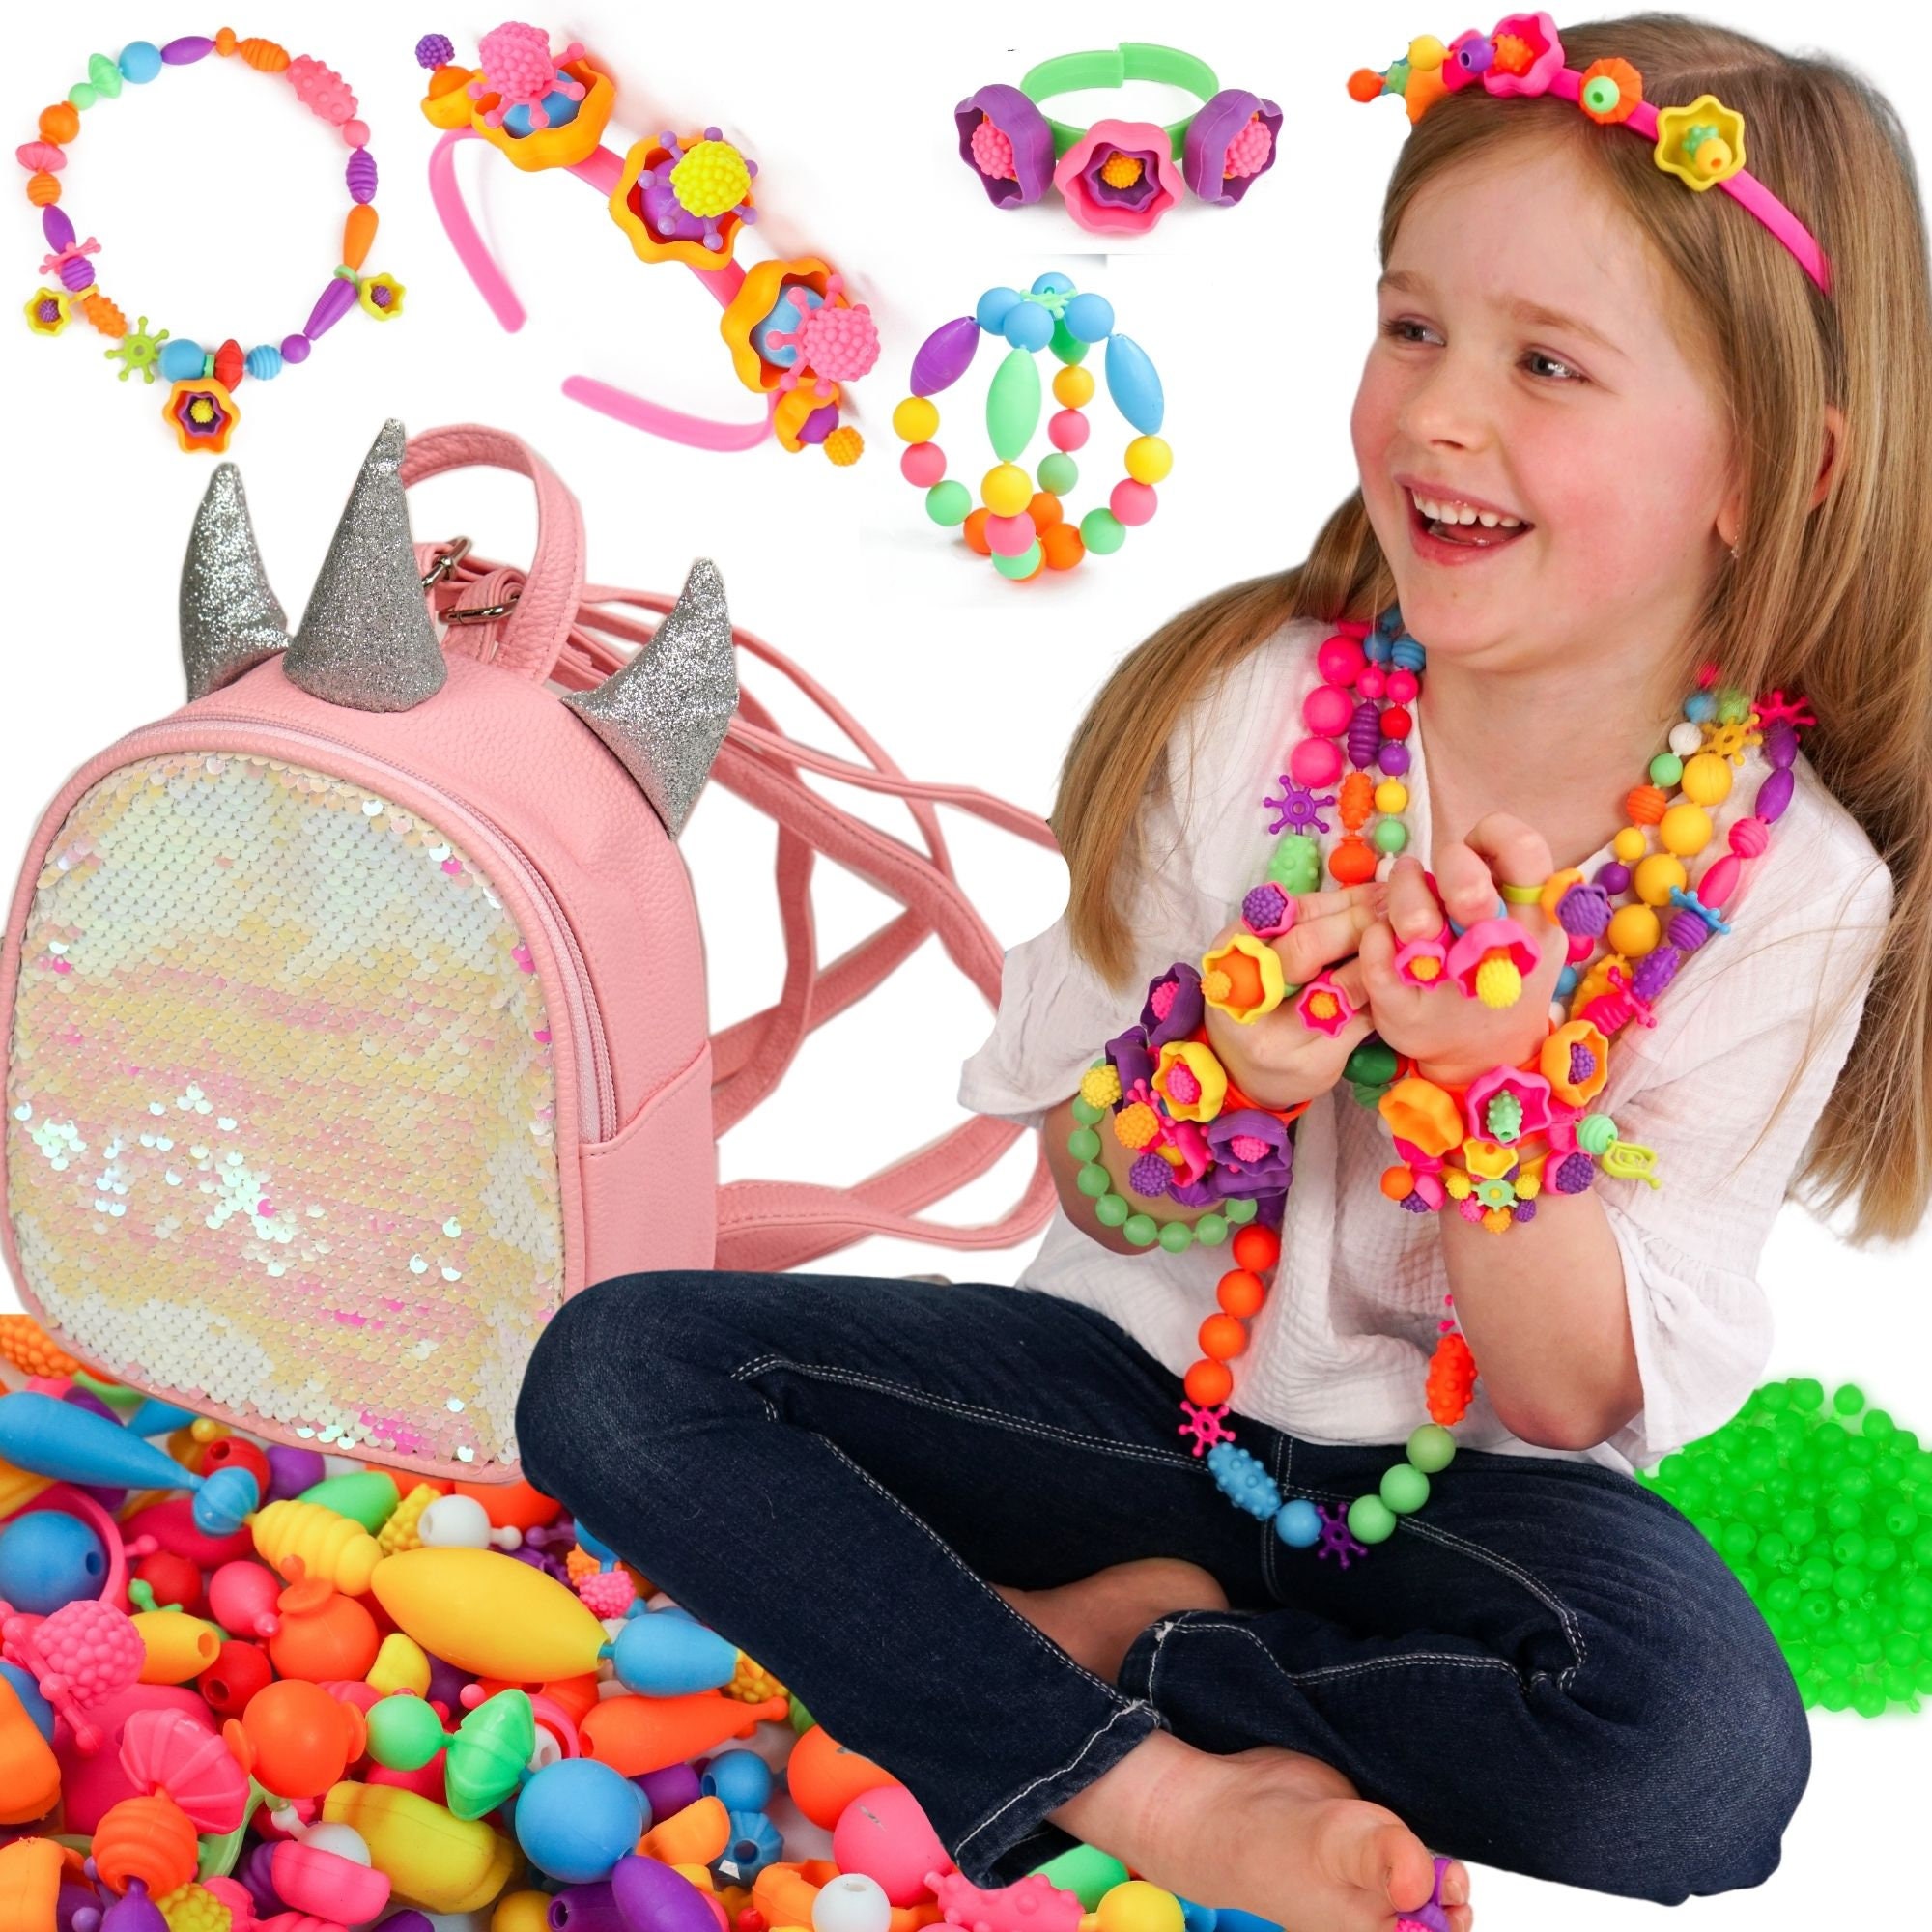  BEKALERZ Jewelry Toys-for-Girls,Toddler Girls Toys Age 6-8,Lovely  Rings Kids-Toys for 3 4 5 6 7 8 9 10 Year Old Girls,Play Jewelry Princess  Toys for Dress Up,Easter Birthday Unicorns-Gifts-for-Girls : Toys